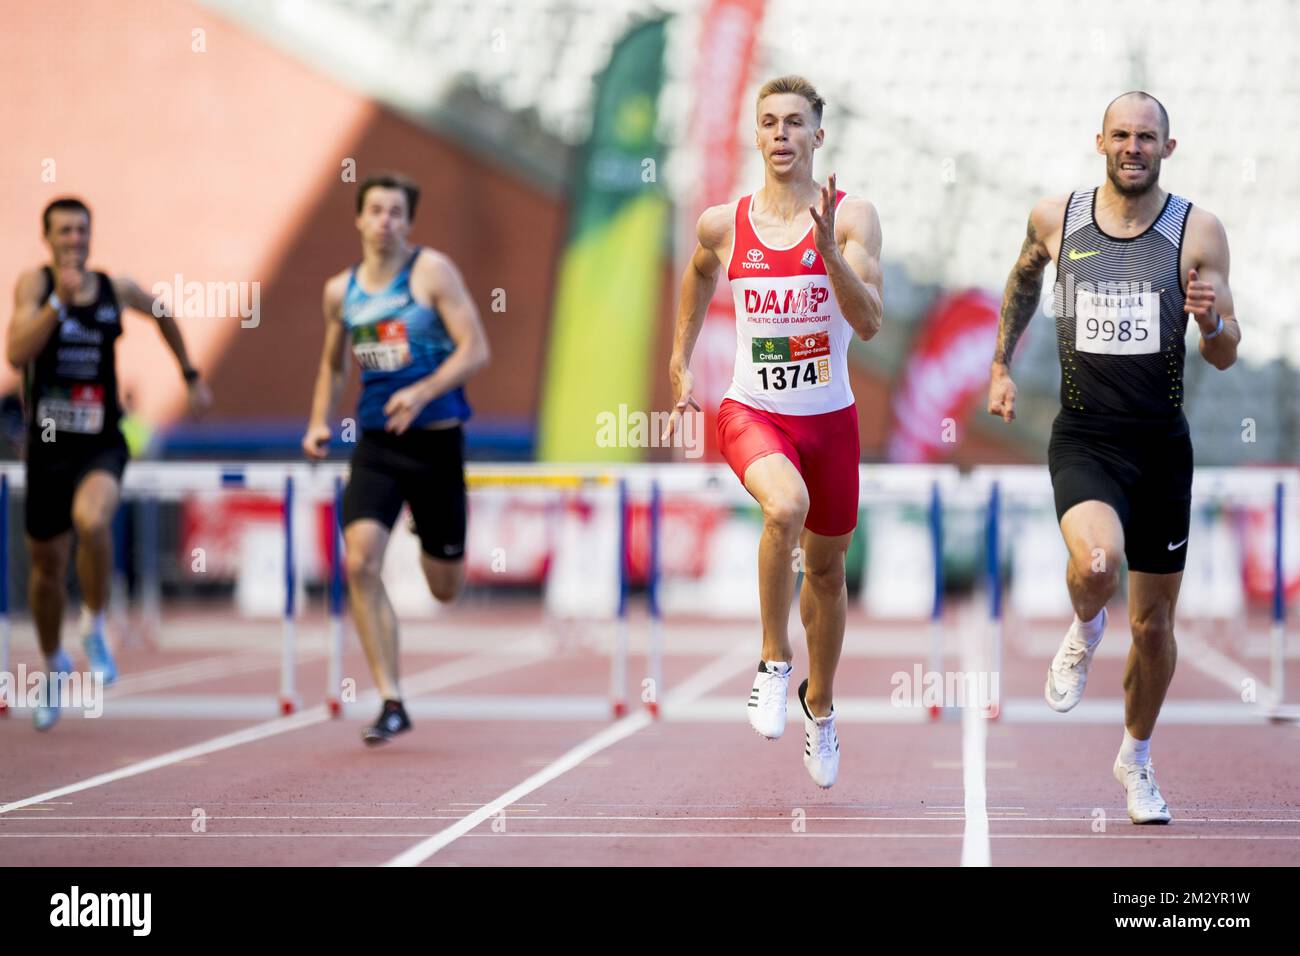 Belgian Julien Watrin (C) and David Greene (R) pictured in action during the men 400m hurdles race at the Belgian Athletics championships, Sunday 01 September 2019 in Brussels. BELGA PHOTO JASPER JACOBS Stock Photo